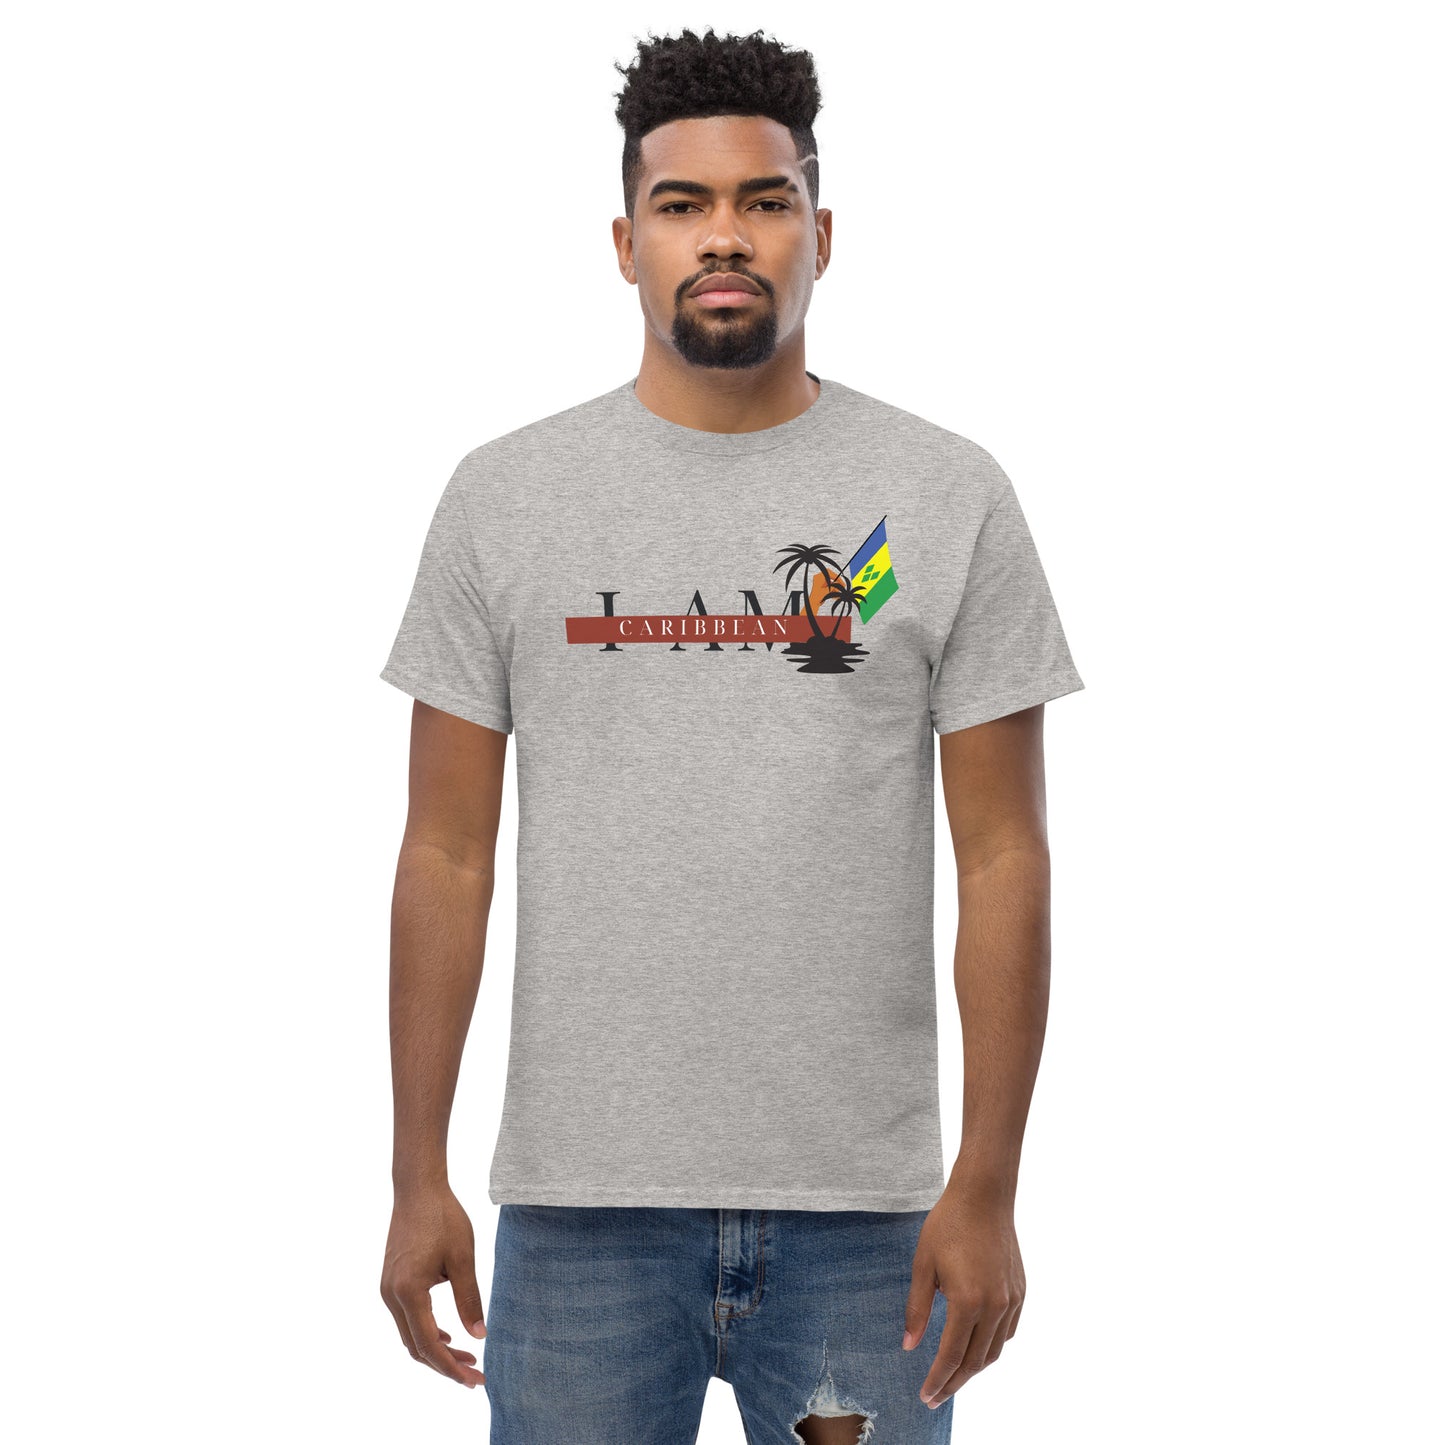 St. Vincent and the Grenadines Men's classic tee